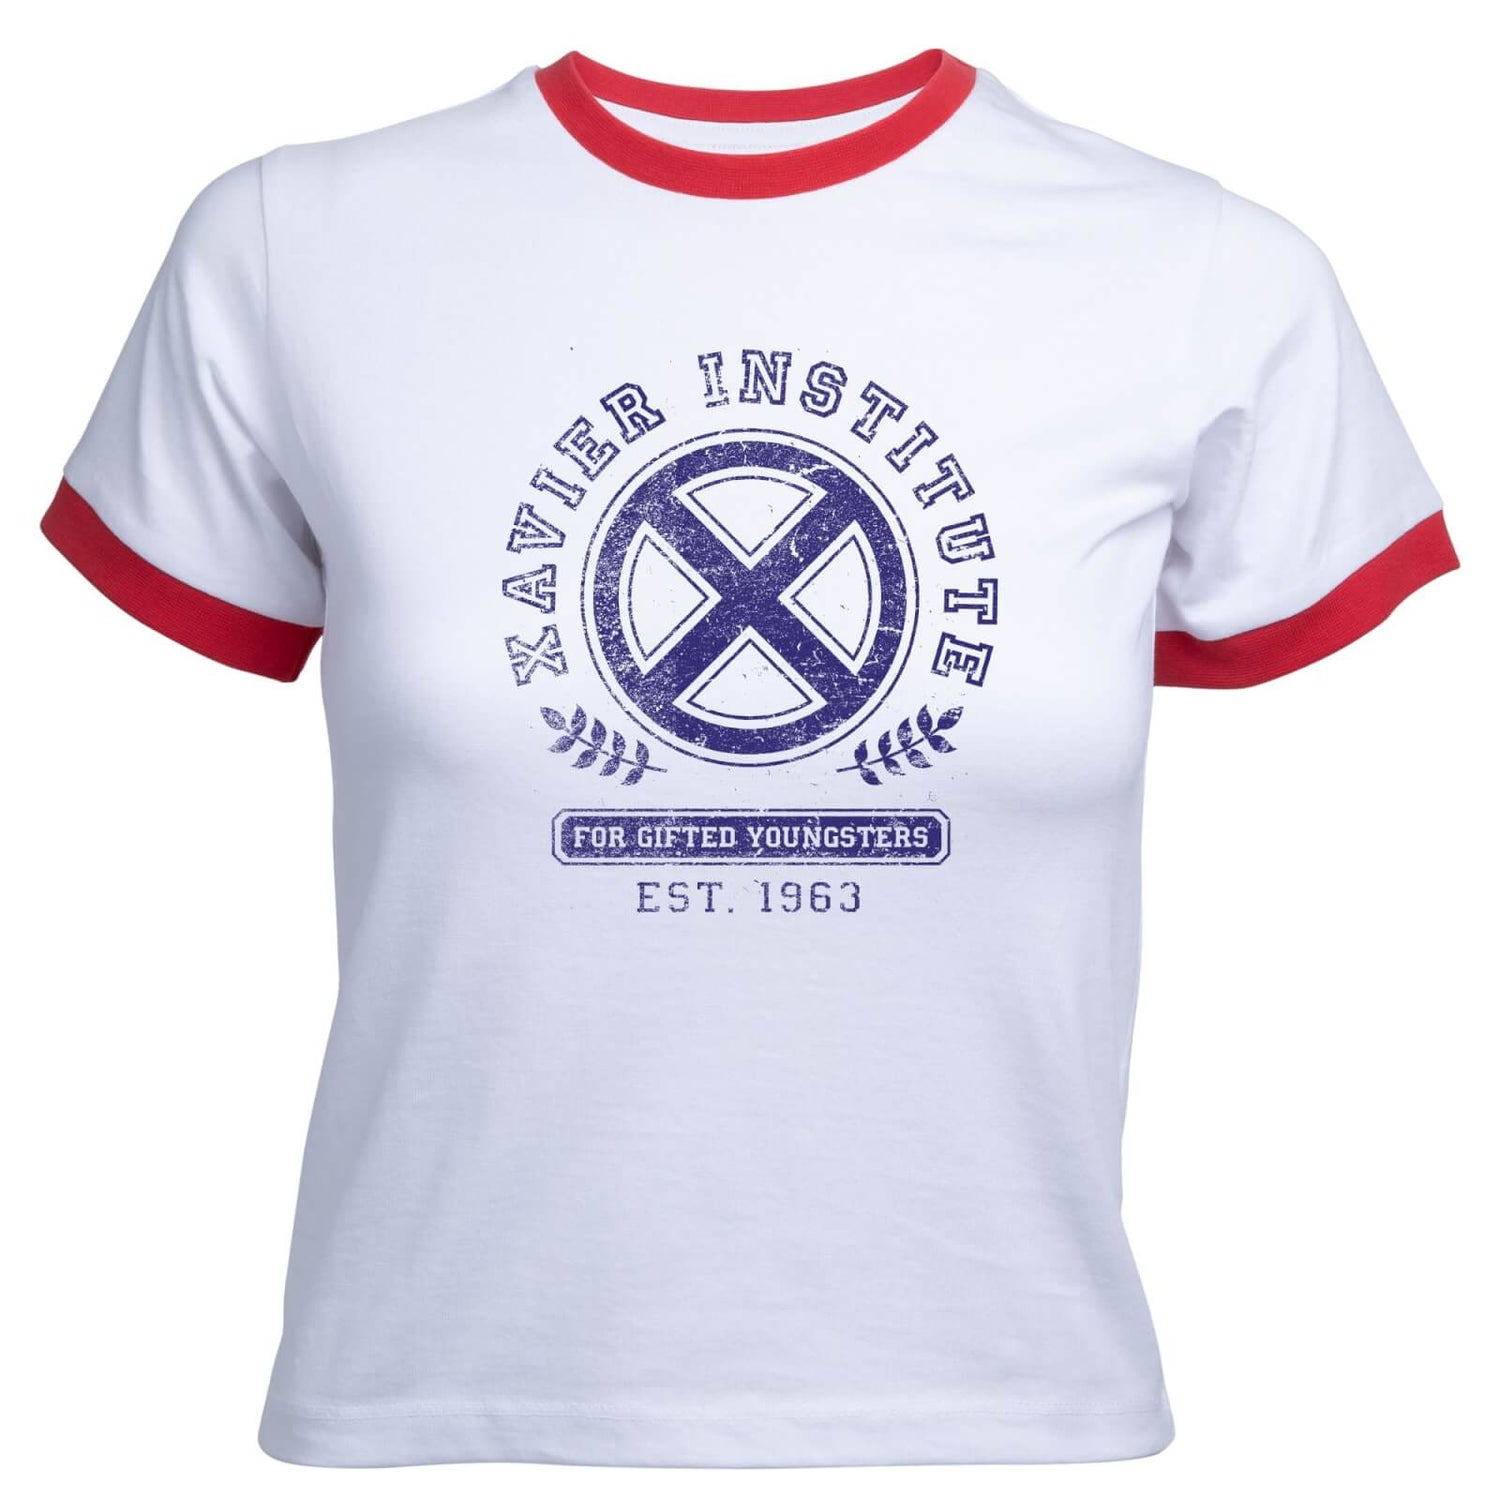 X-Men Xavier Institute For Gifted Youngsters Women's Cropped Ringer T-Shirt - White Red